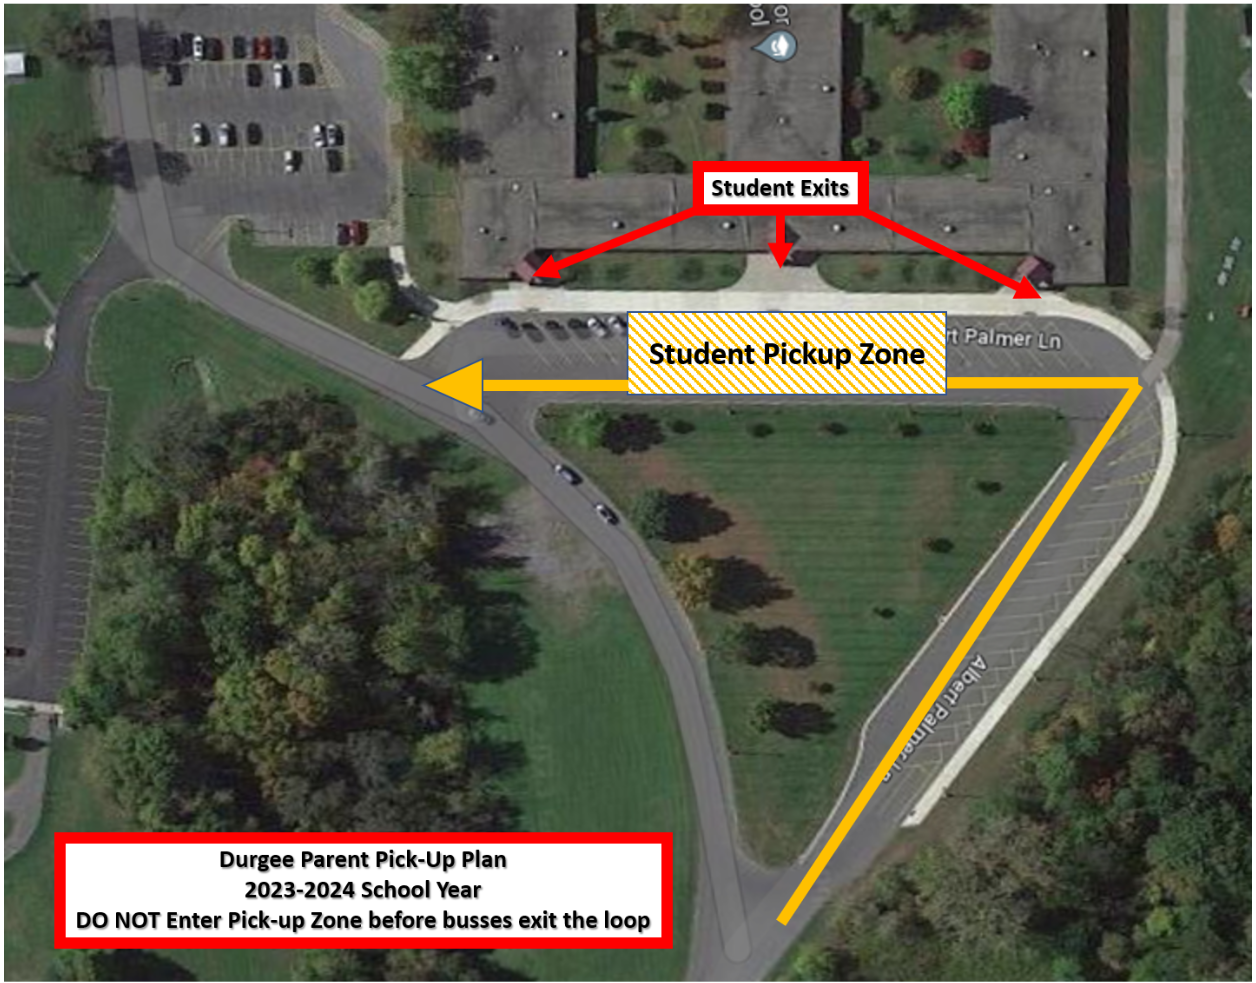 Map of campus - parents enter bus loop and pause in front of doors to pickup students